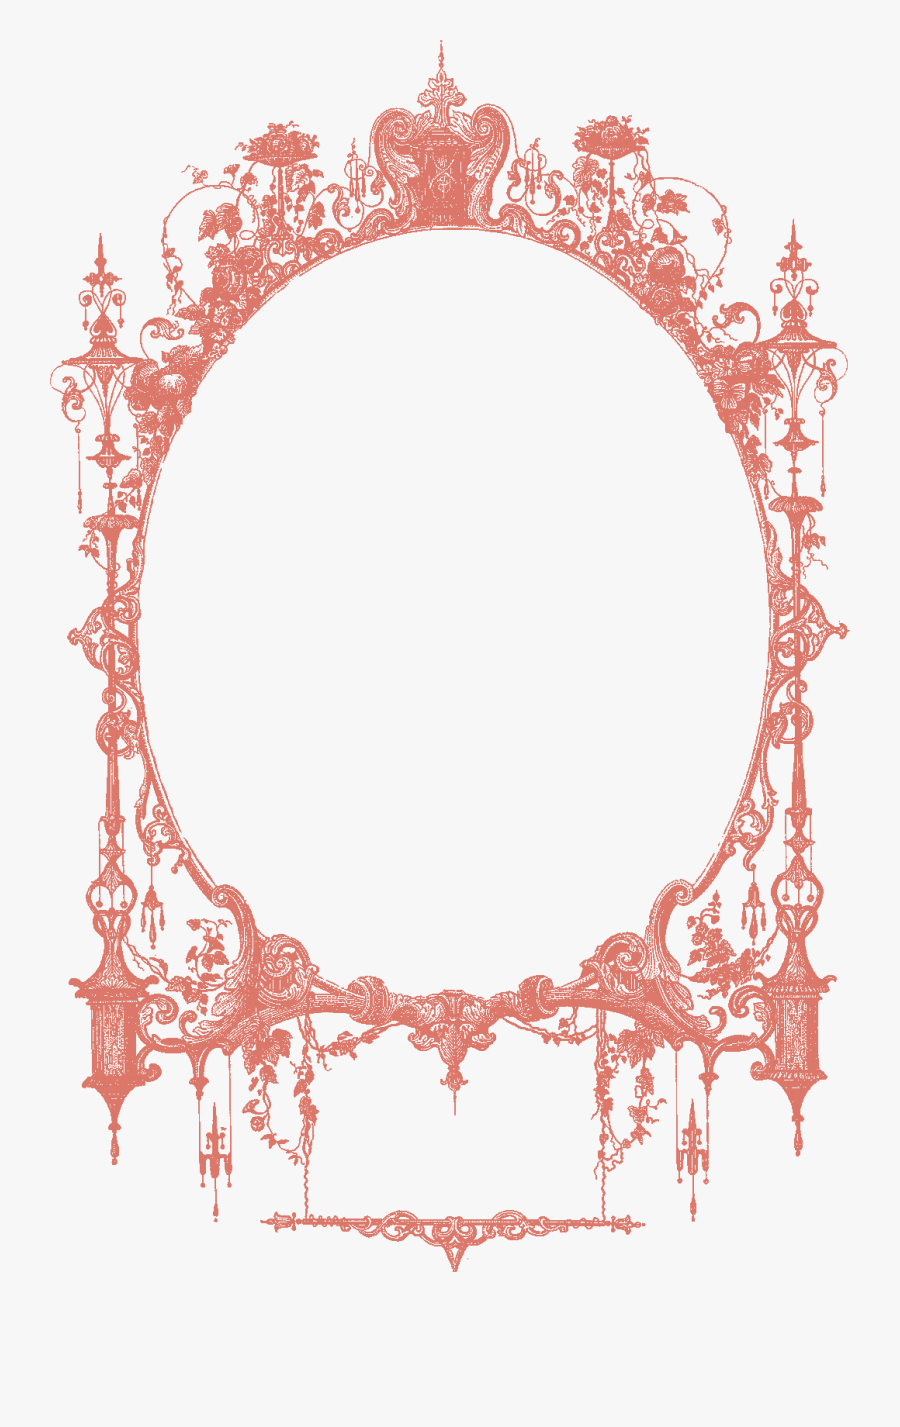 Free Download Halloween Frame Invitation Clipart Wedding - Mirror Mirror On The Wall Tattoos, Transparent Clipart